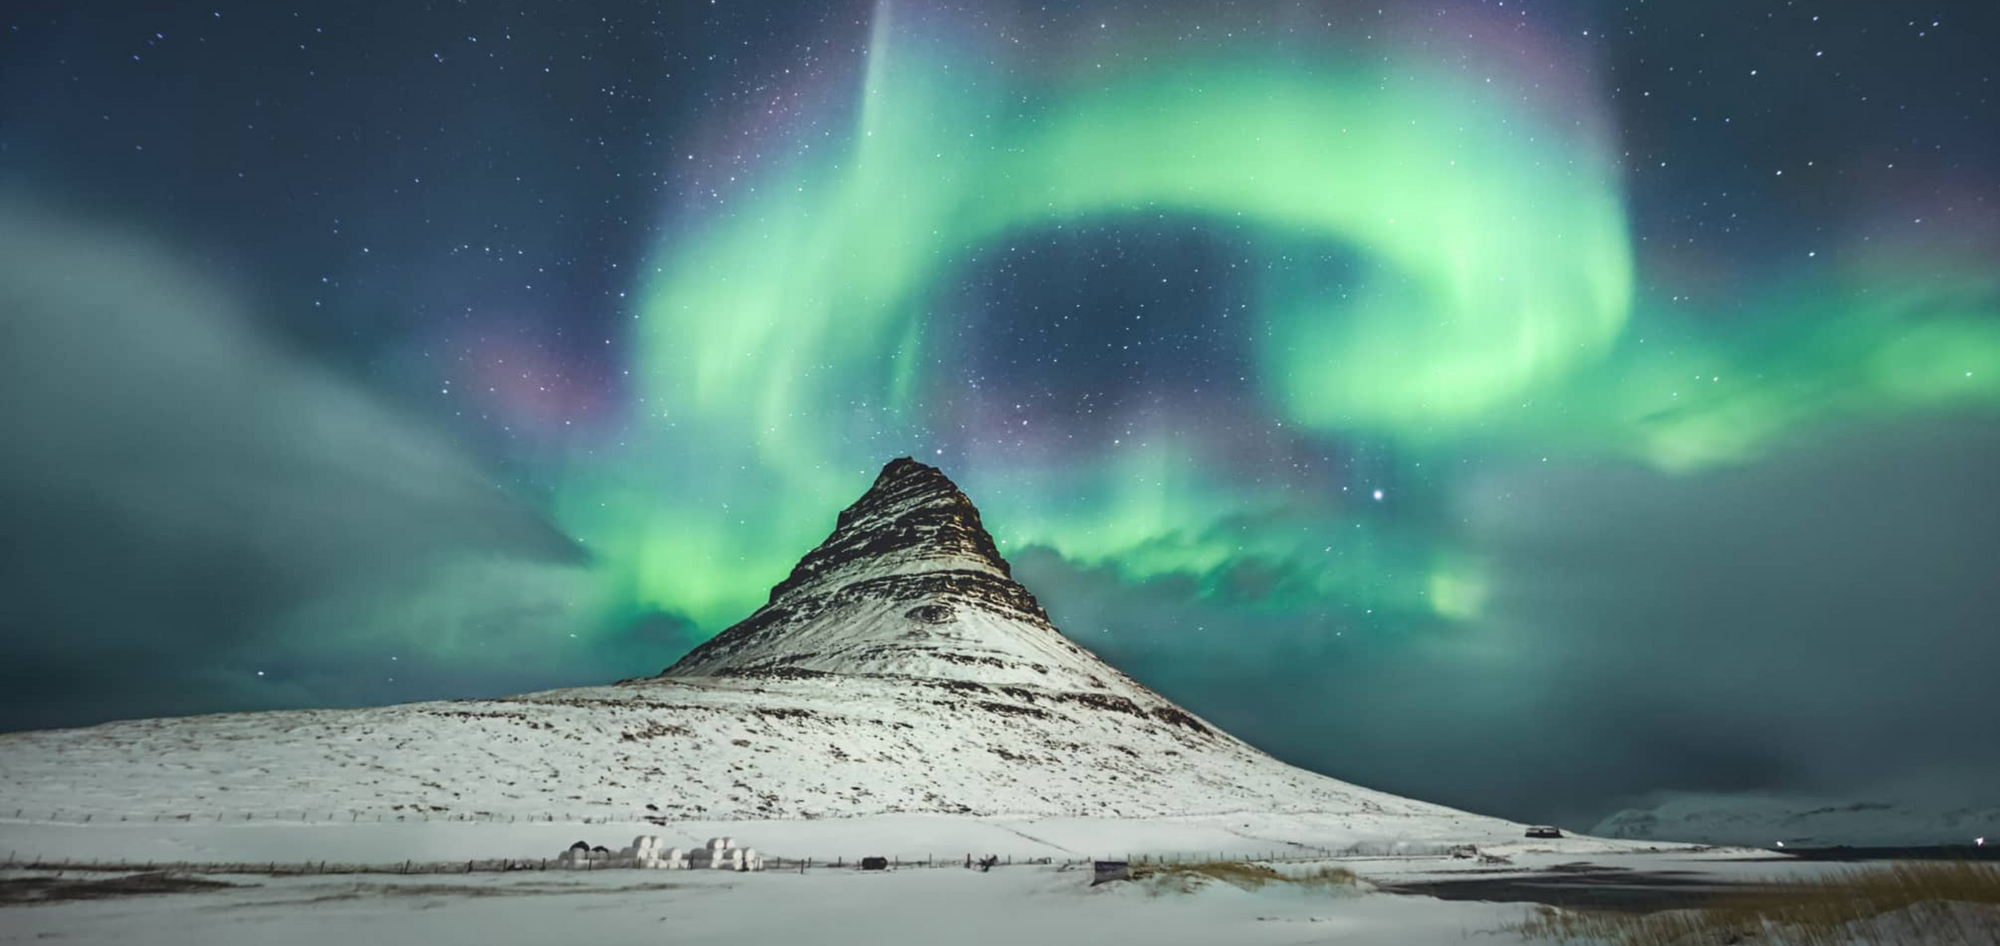 How to shoot the northern lights